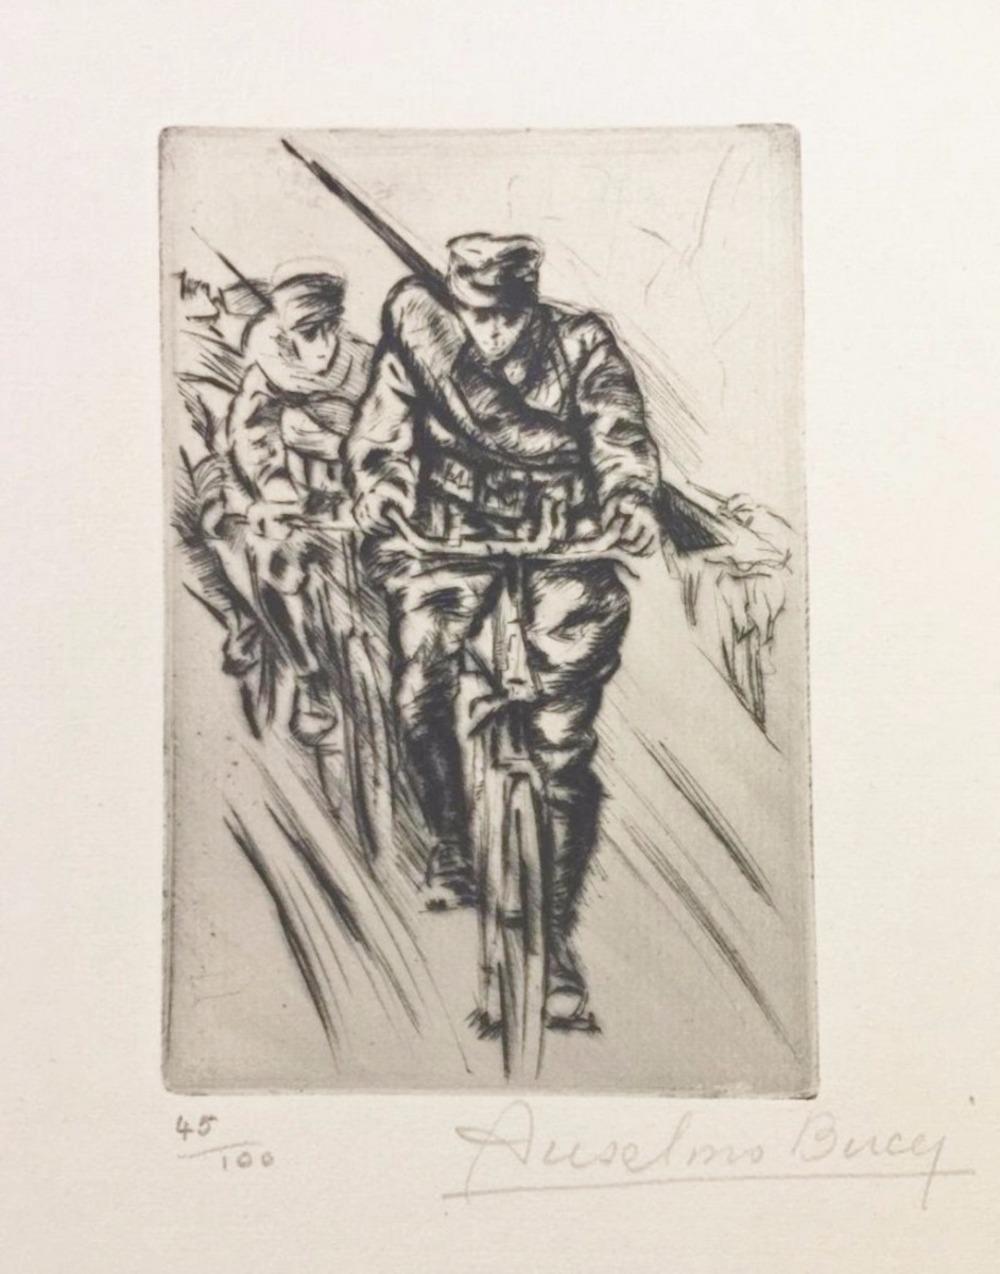 Image dimensions: 15 x 10  cm.

Hand signed. Edition of 100 prints on Hollande paper. From the collection: “Croquis du Front Italien”, published in Paris by D'Alignan editions. Anselmo Bucci was an Italian painter and printmaker.

He took part in